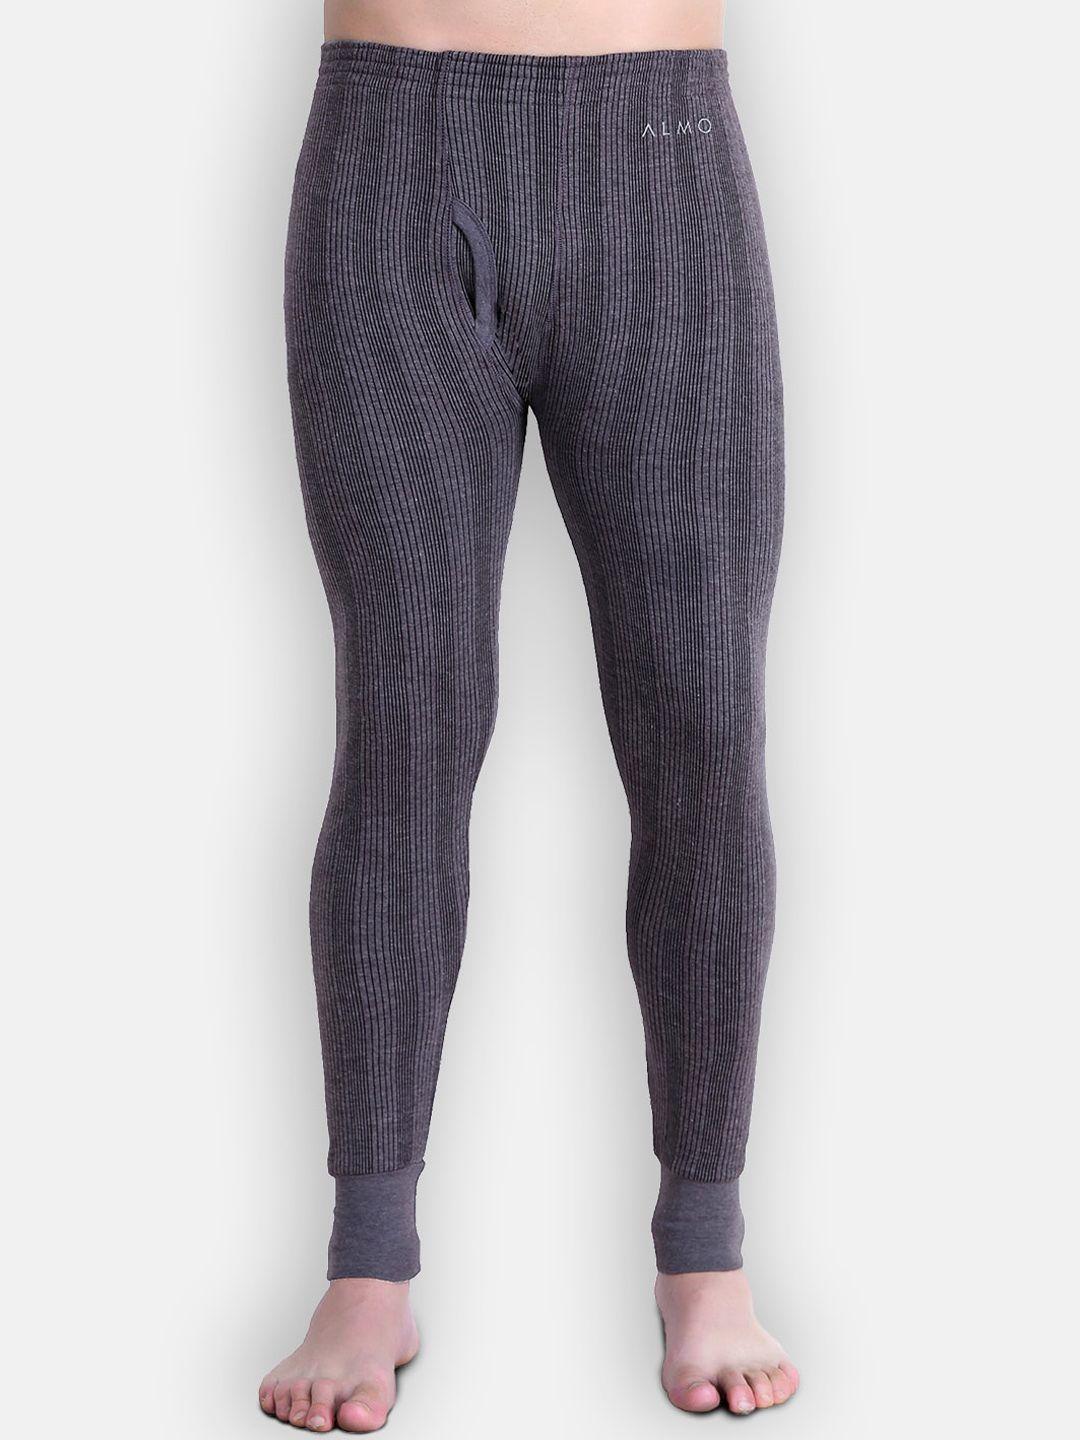 almo-wear-men-grey-solid-cotton-thermal-bottoms